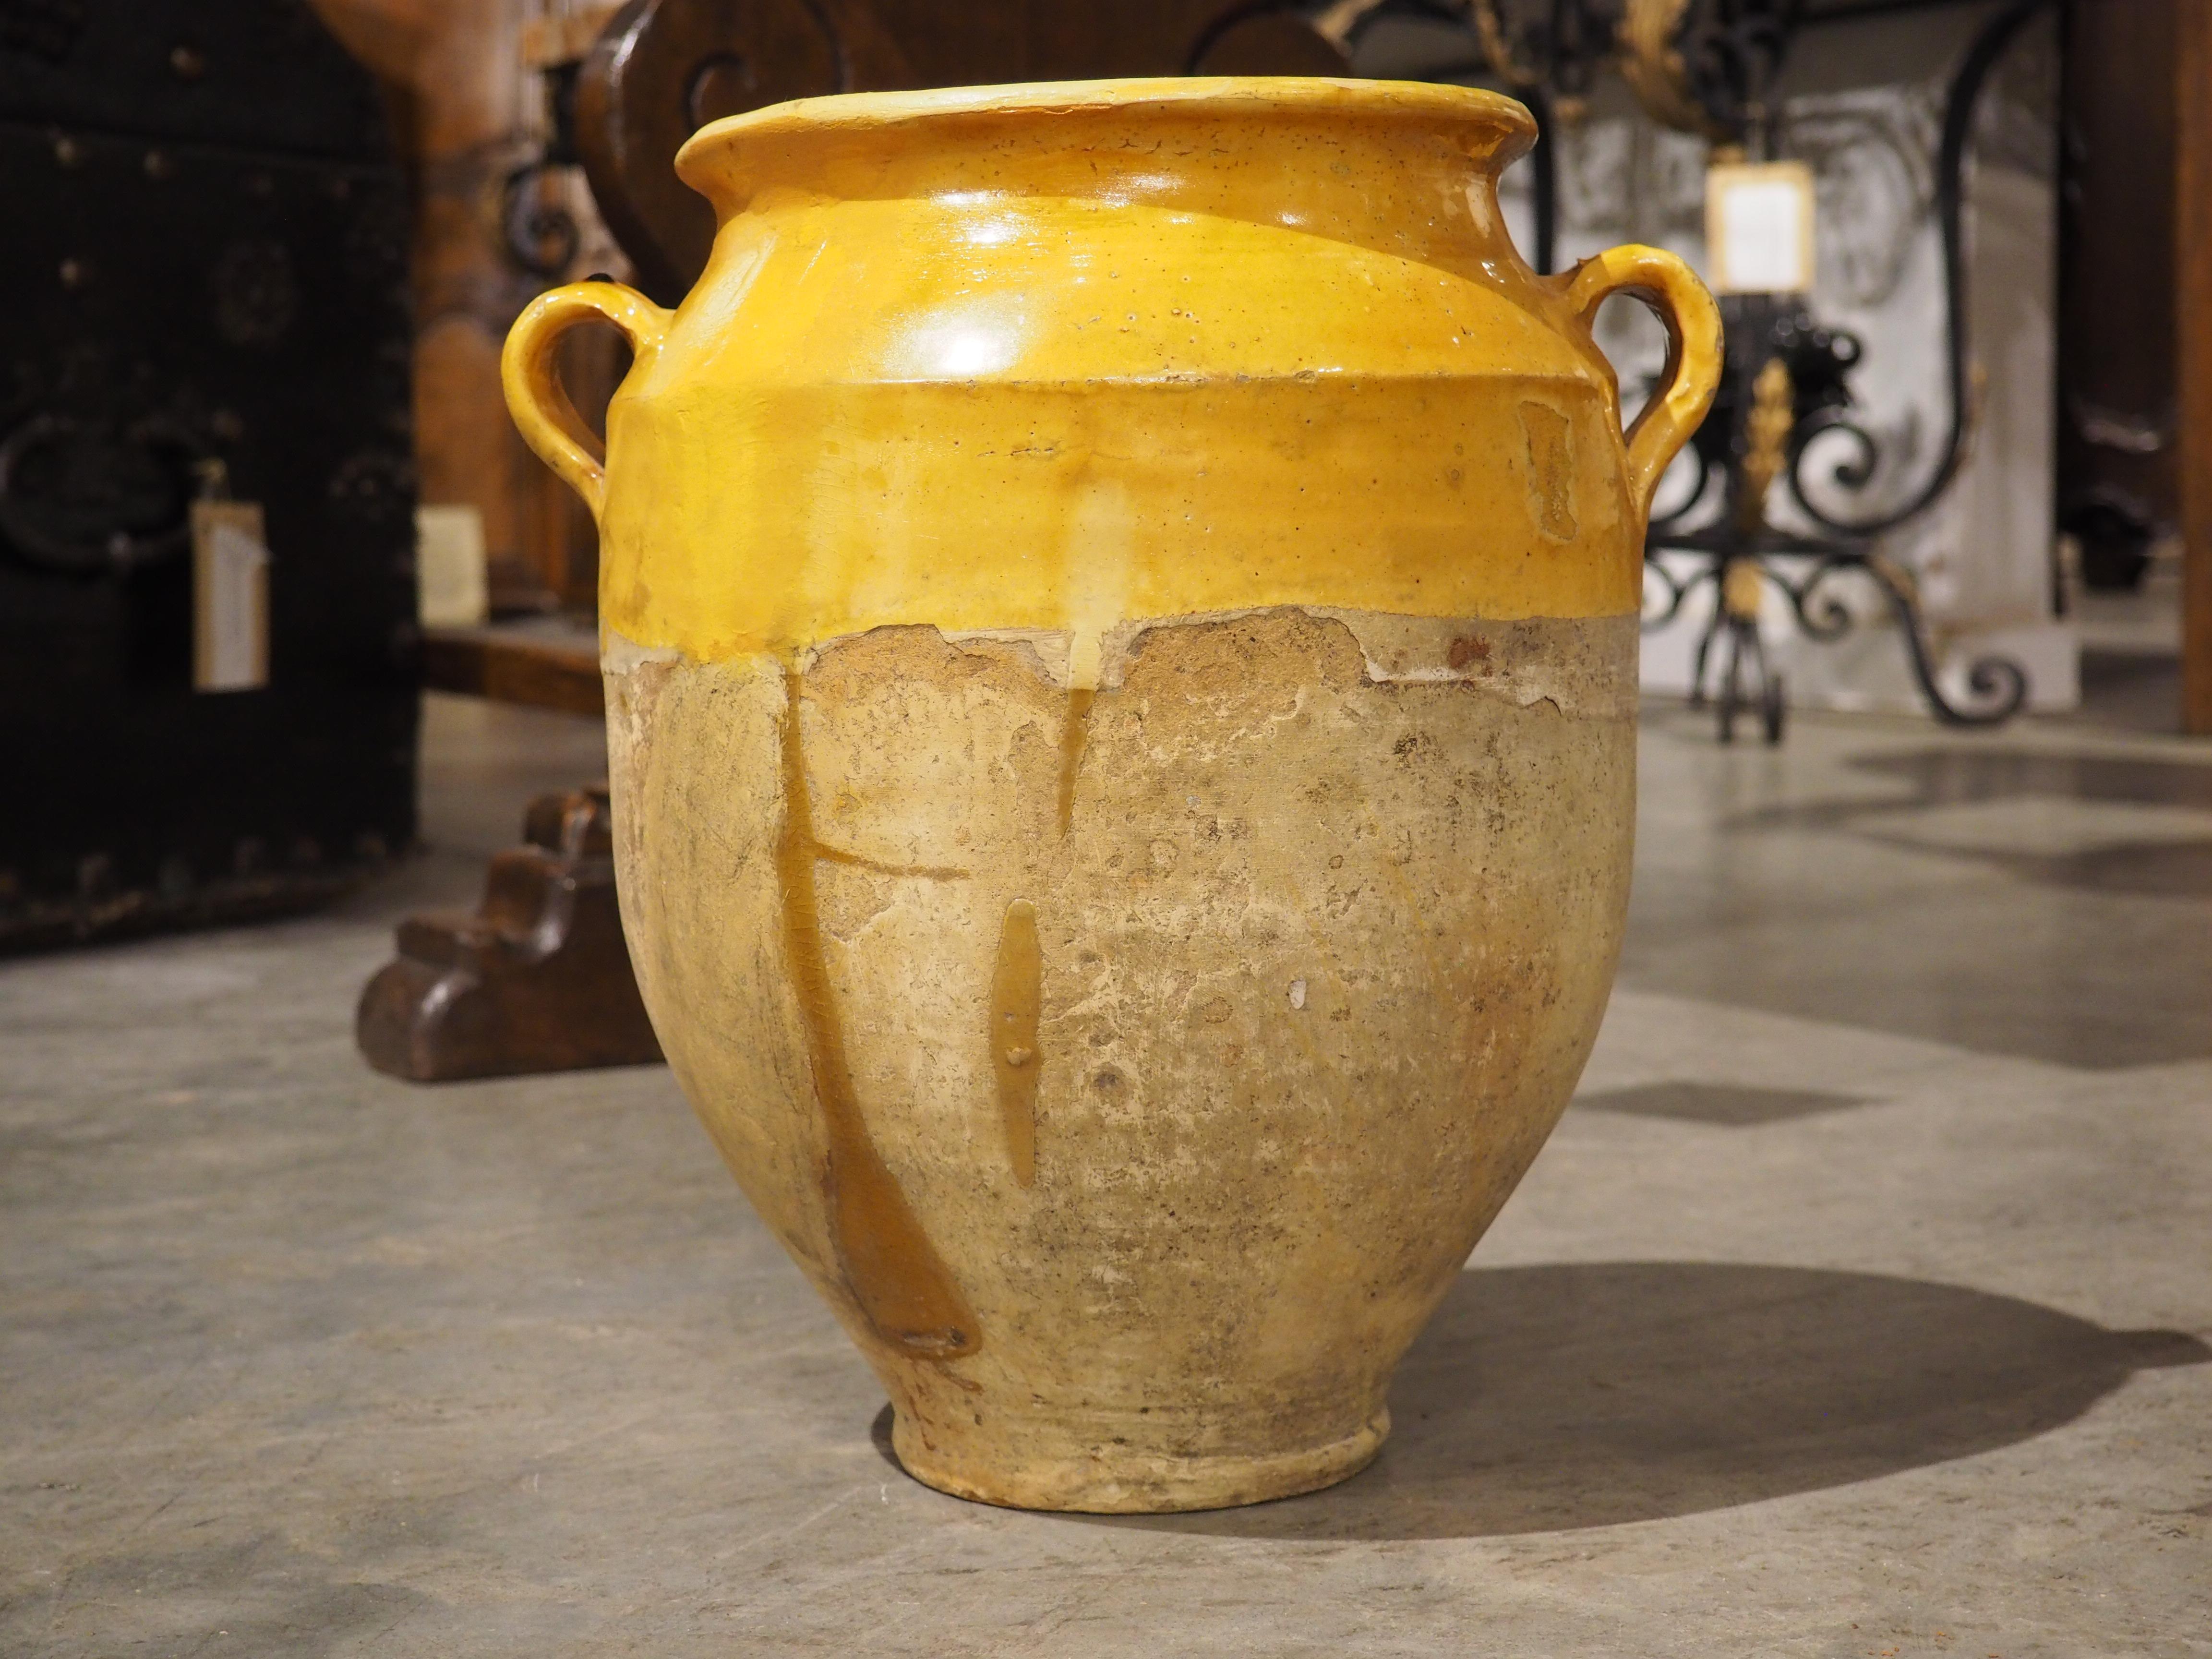 Part of our huge collection of large, colorful clay vessels, known as confit pots. Derived from the French word confire (meaning “to preserve”), confit pots were used to store cooked game in their own fat before the advent of refrigeration. The